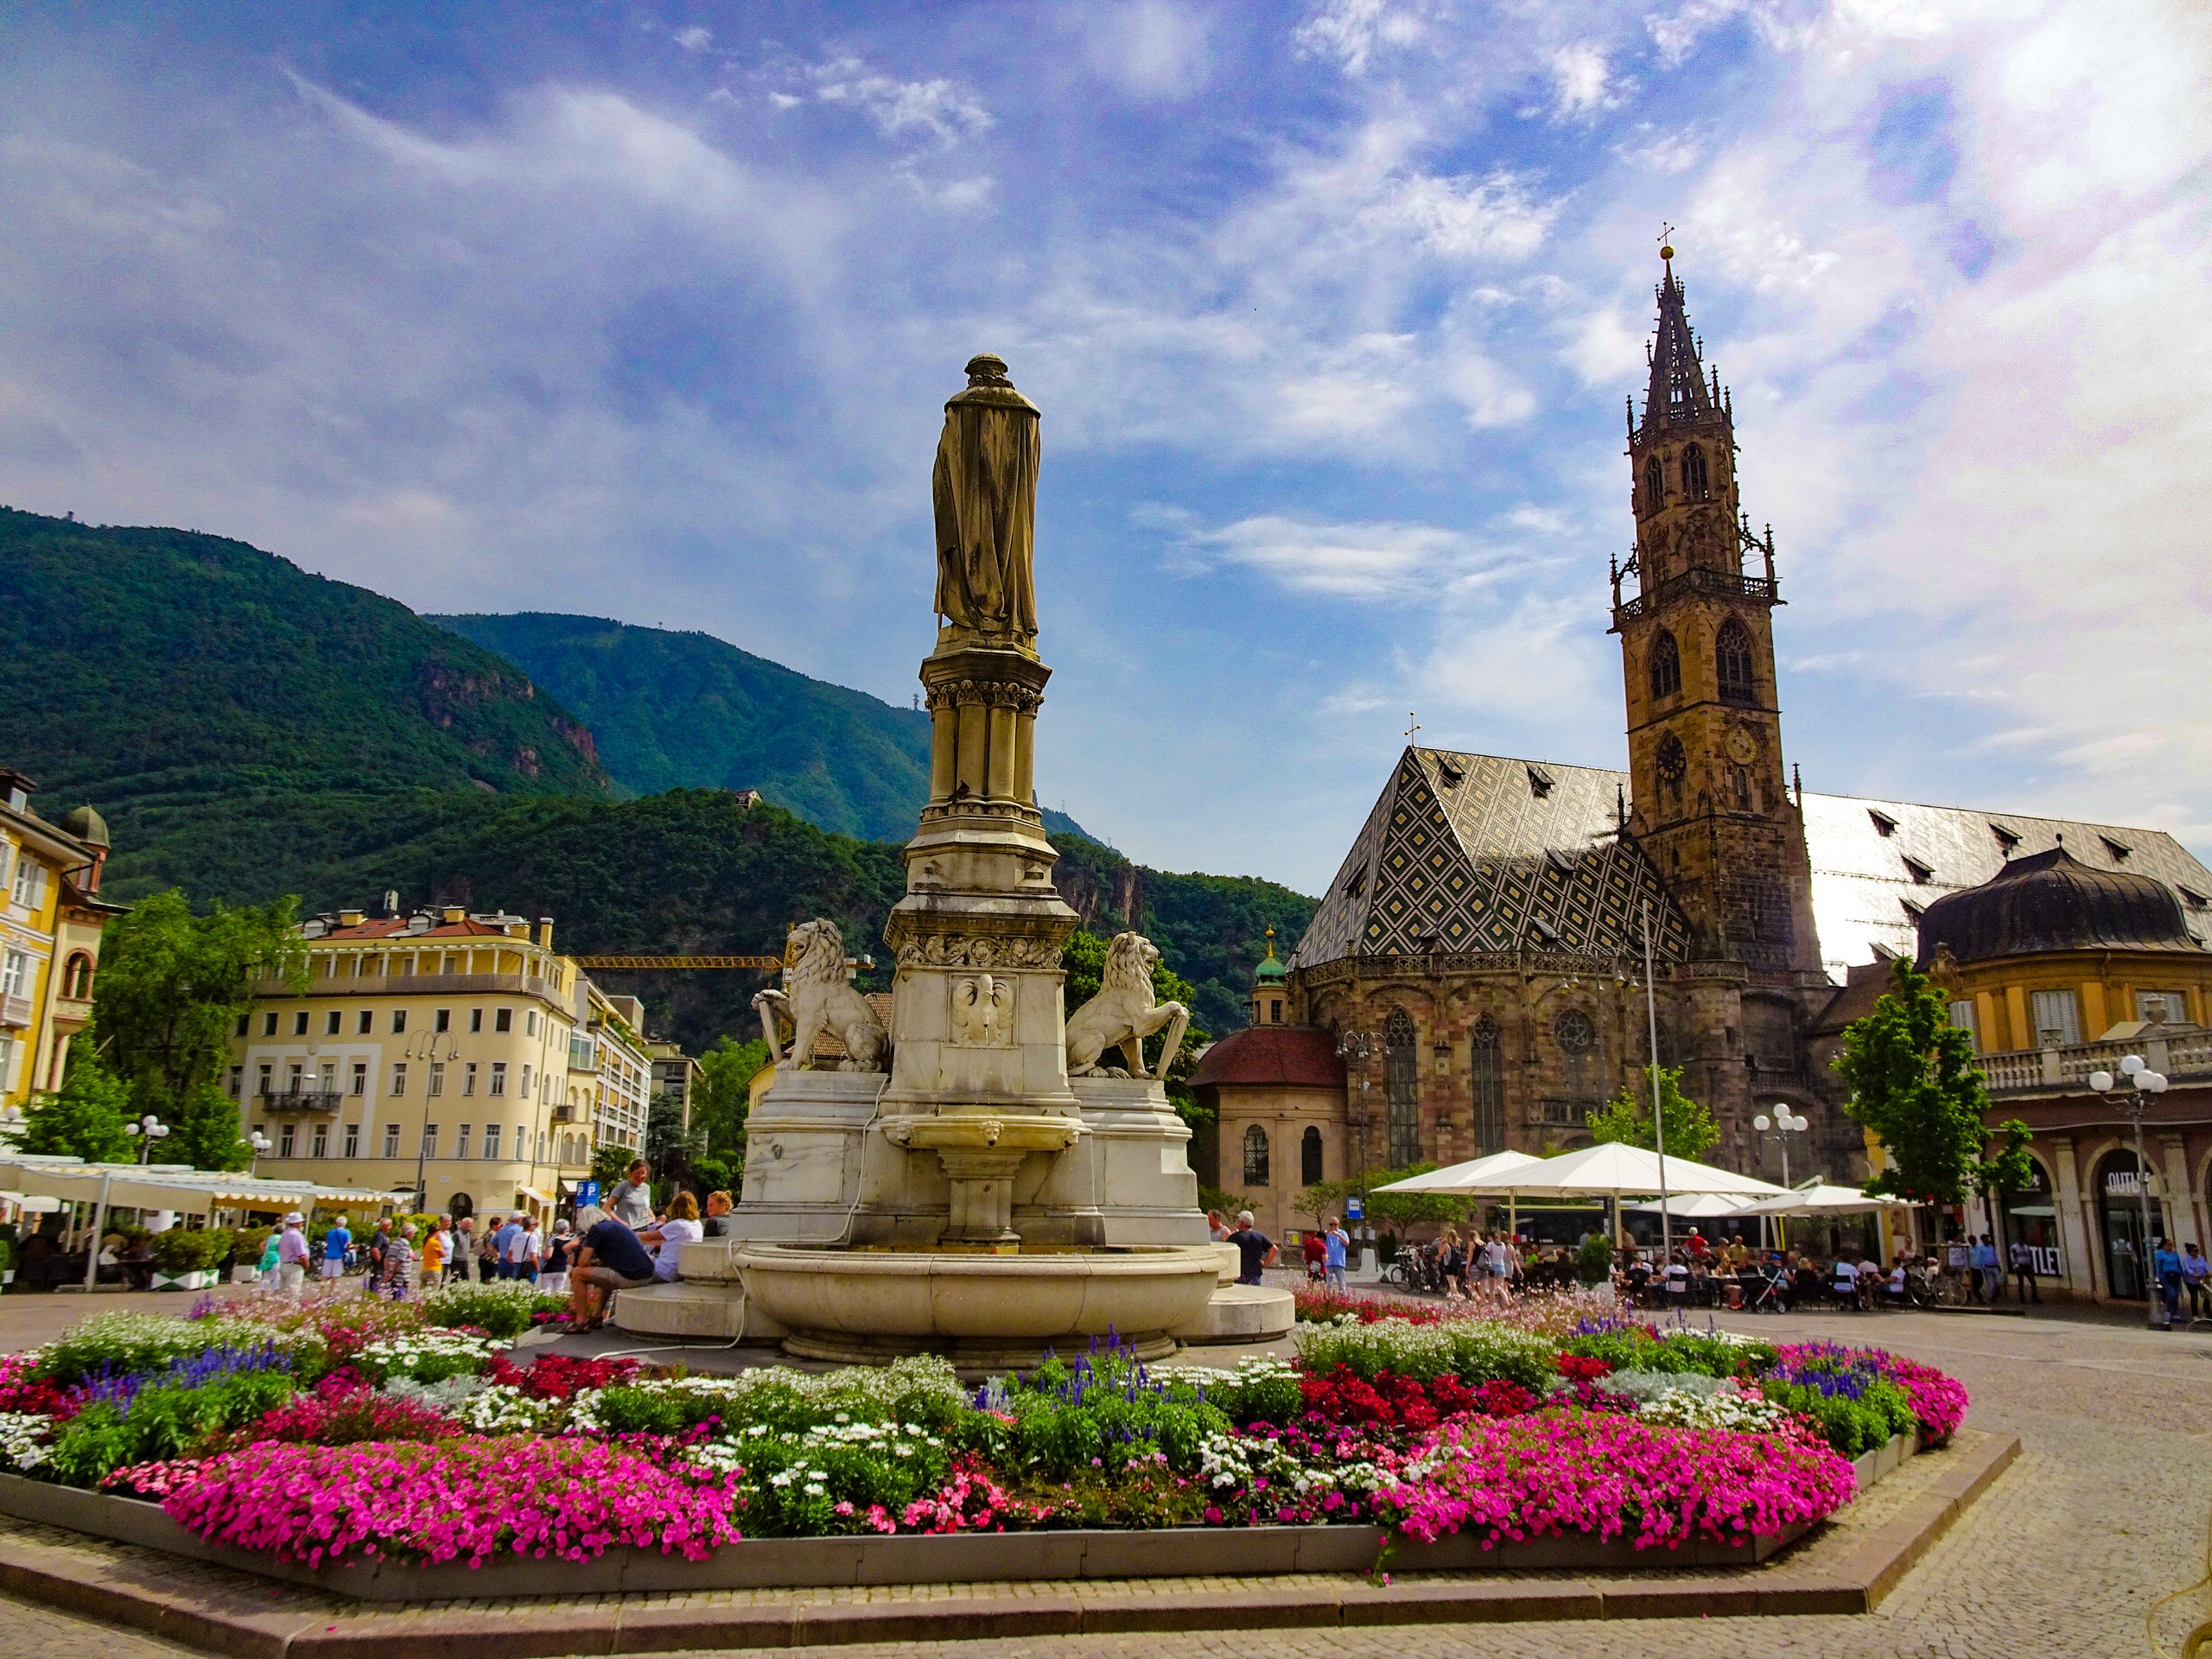 Beautiful center plaza visited while cycling in Austria and Italy